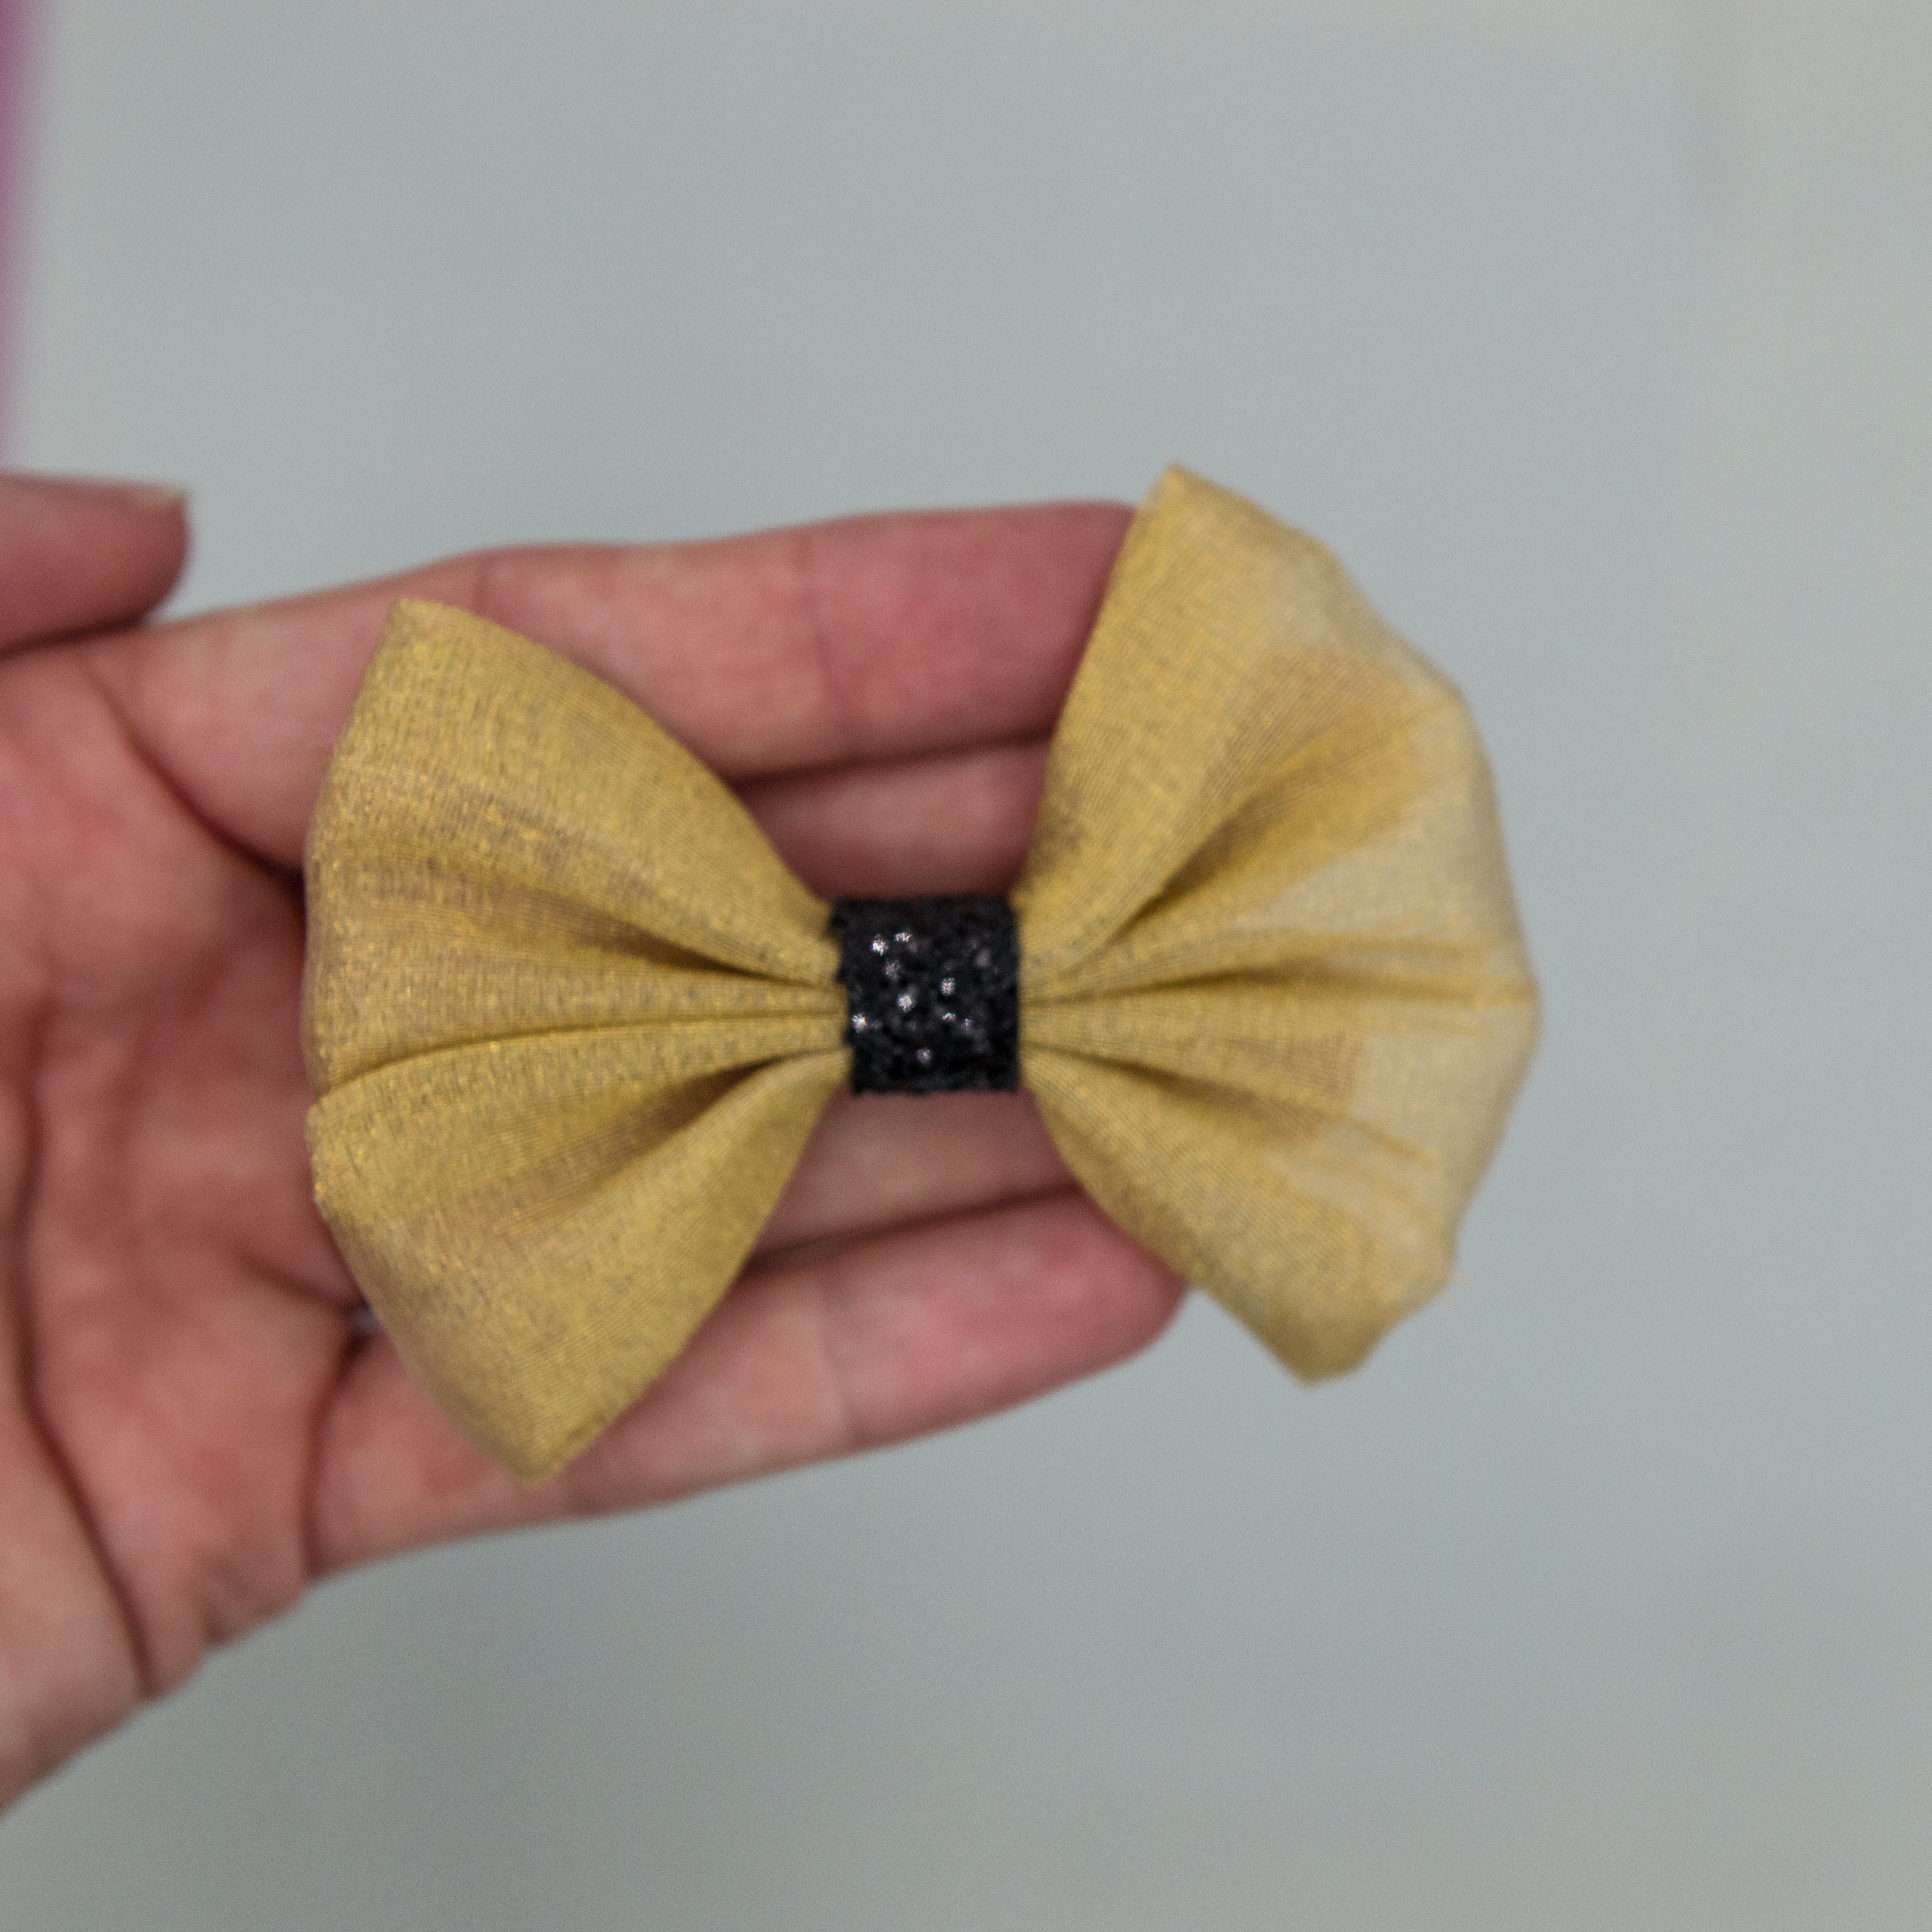 Vintage golden lace Bow 3 inch - NYE2